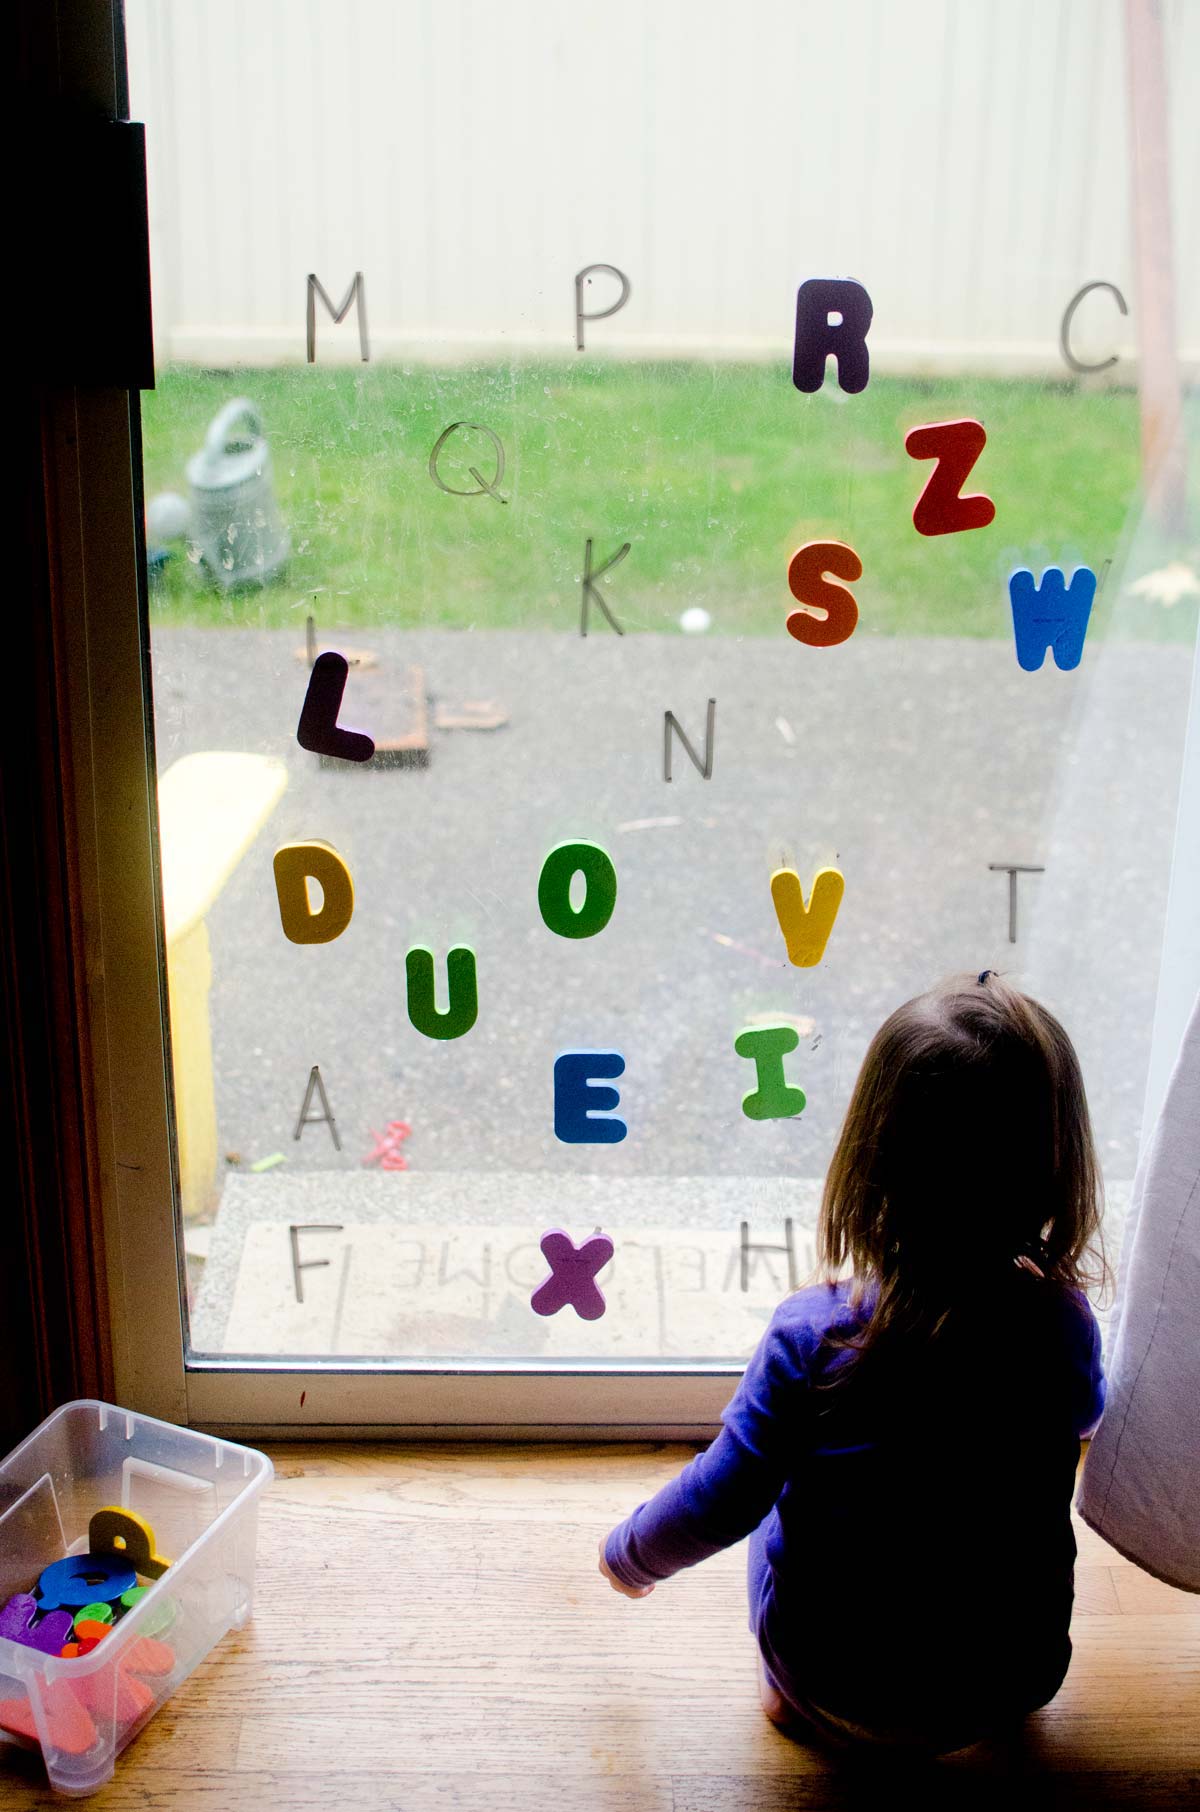 A child squats on the floor in front of a sliding glass door placing foam letters onto to. There are many letters on the glass.